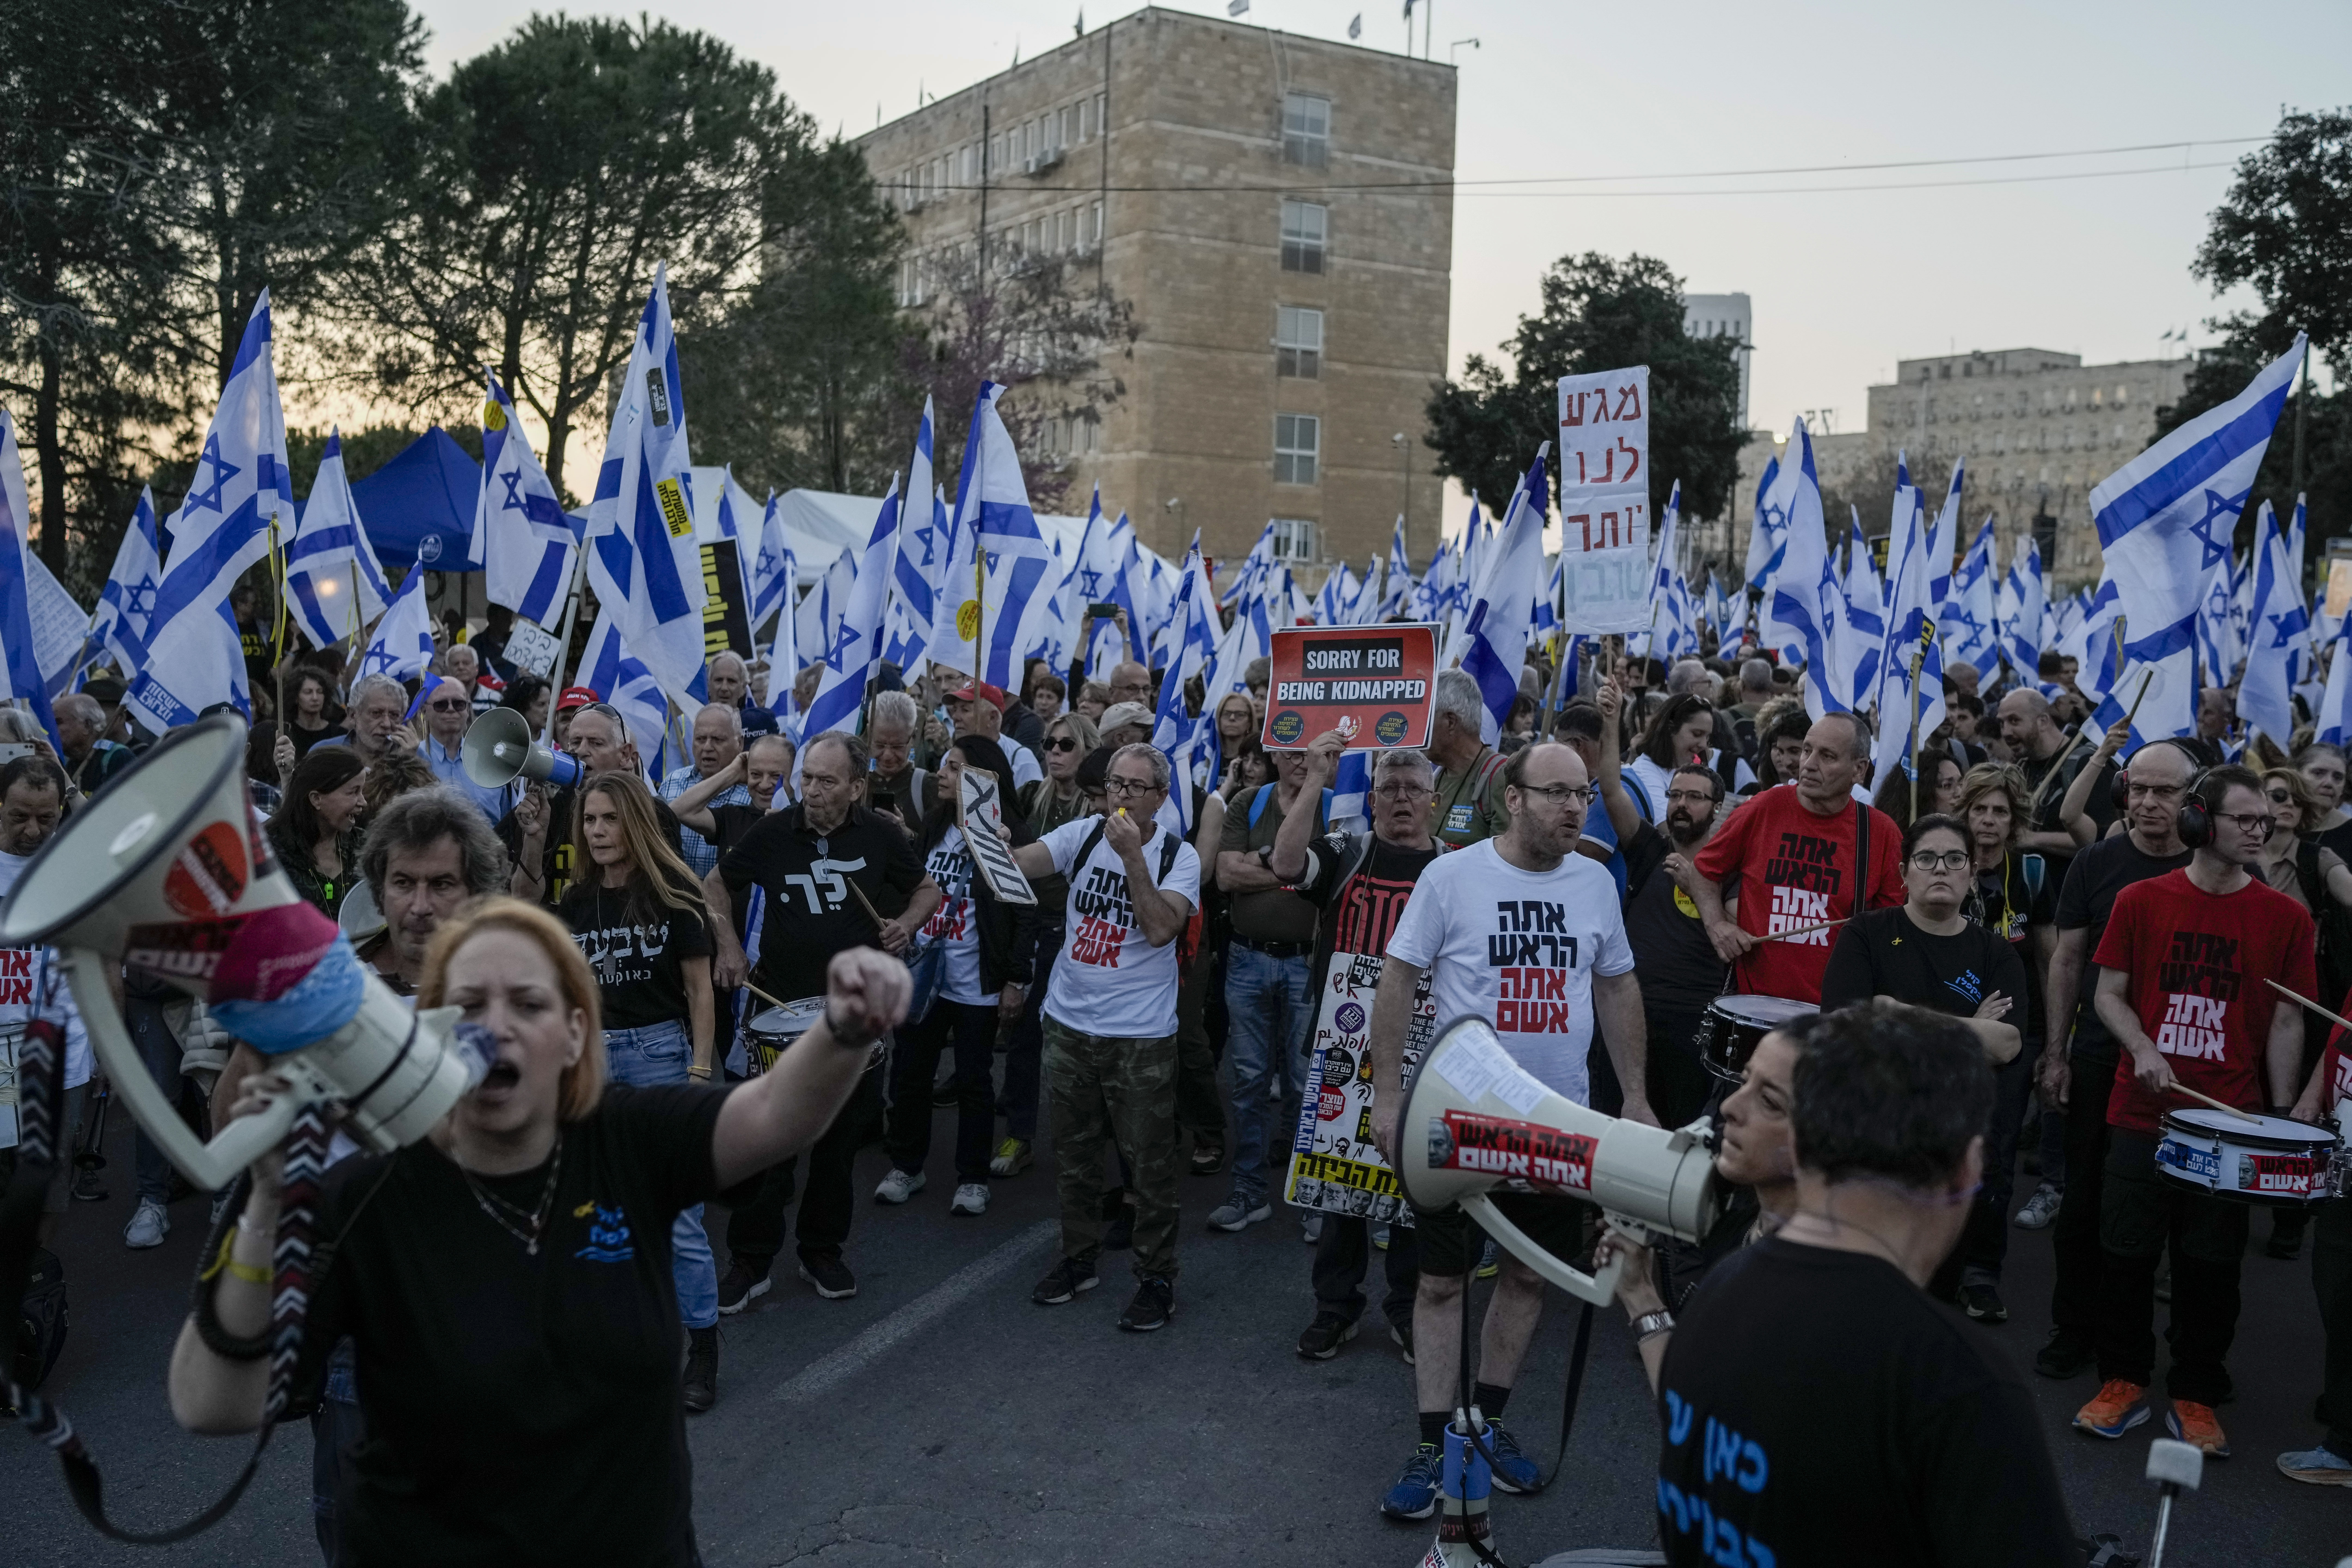 People take part in a protest against Israeli Prime Minister Benjamin Netanyahu's government, and call for the release of hostages held in Gaza, outside the Knesset, Israel's parliament, in Jerusalem on March 31.